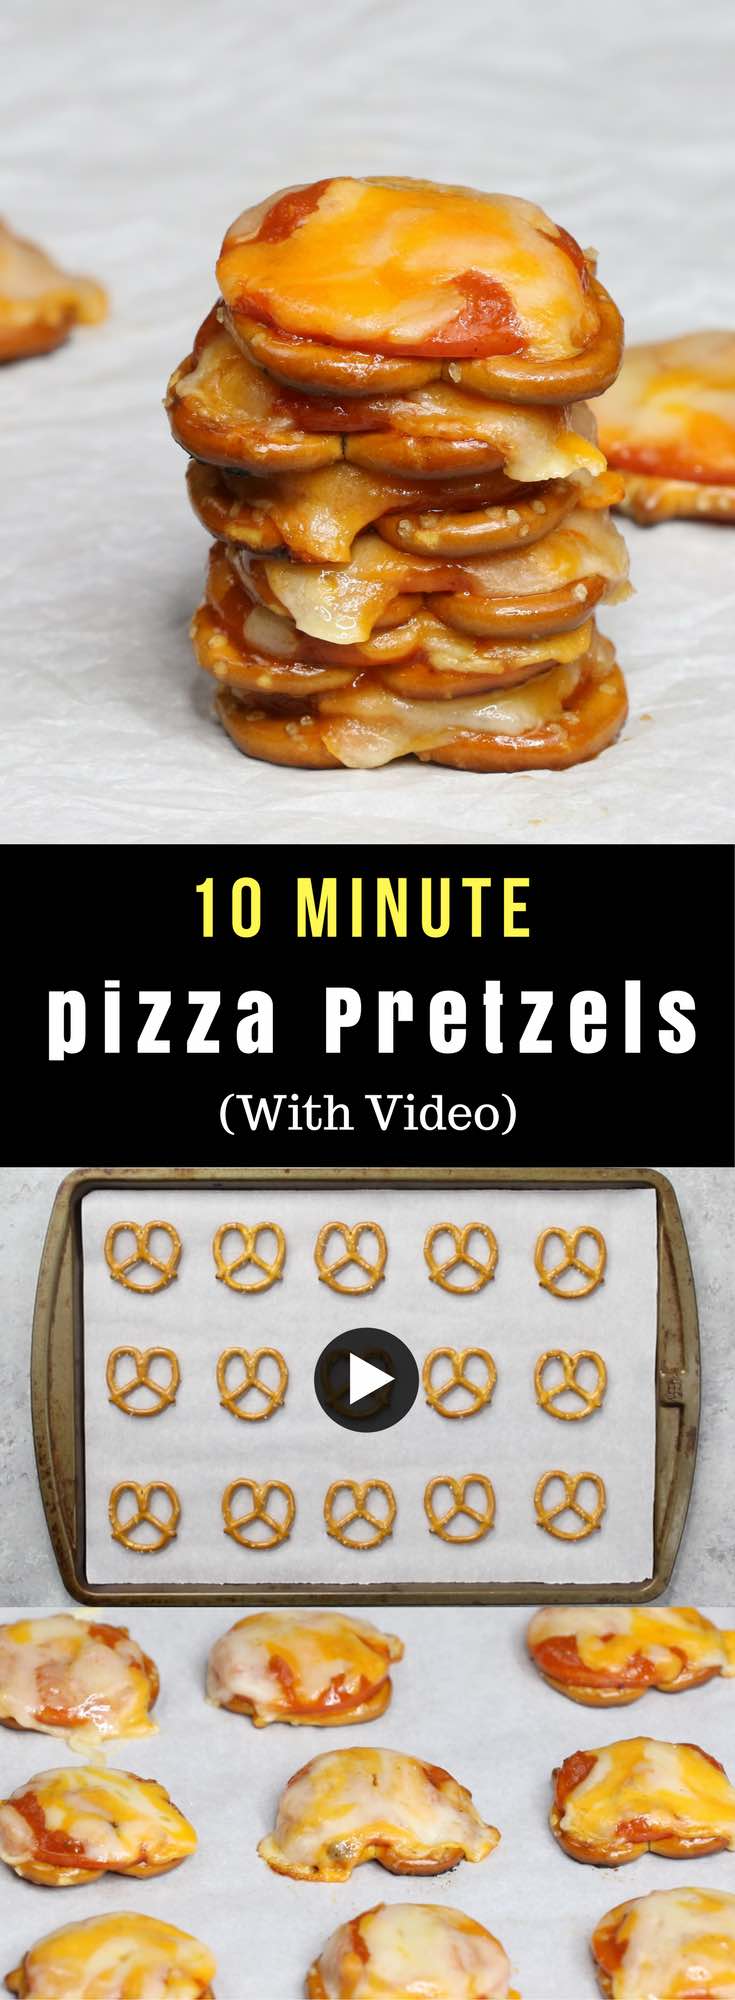 Pizza Pretzels – only 4 ingredients and 10 minutes. Super easy and perfect for an after school snack! All you need is 4 simple ingredients: pretzels, pepperoni, pasta sauce and shredded mozzarella. Quick and easy recipe. Video recipe. | Tipbuzz.com